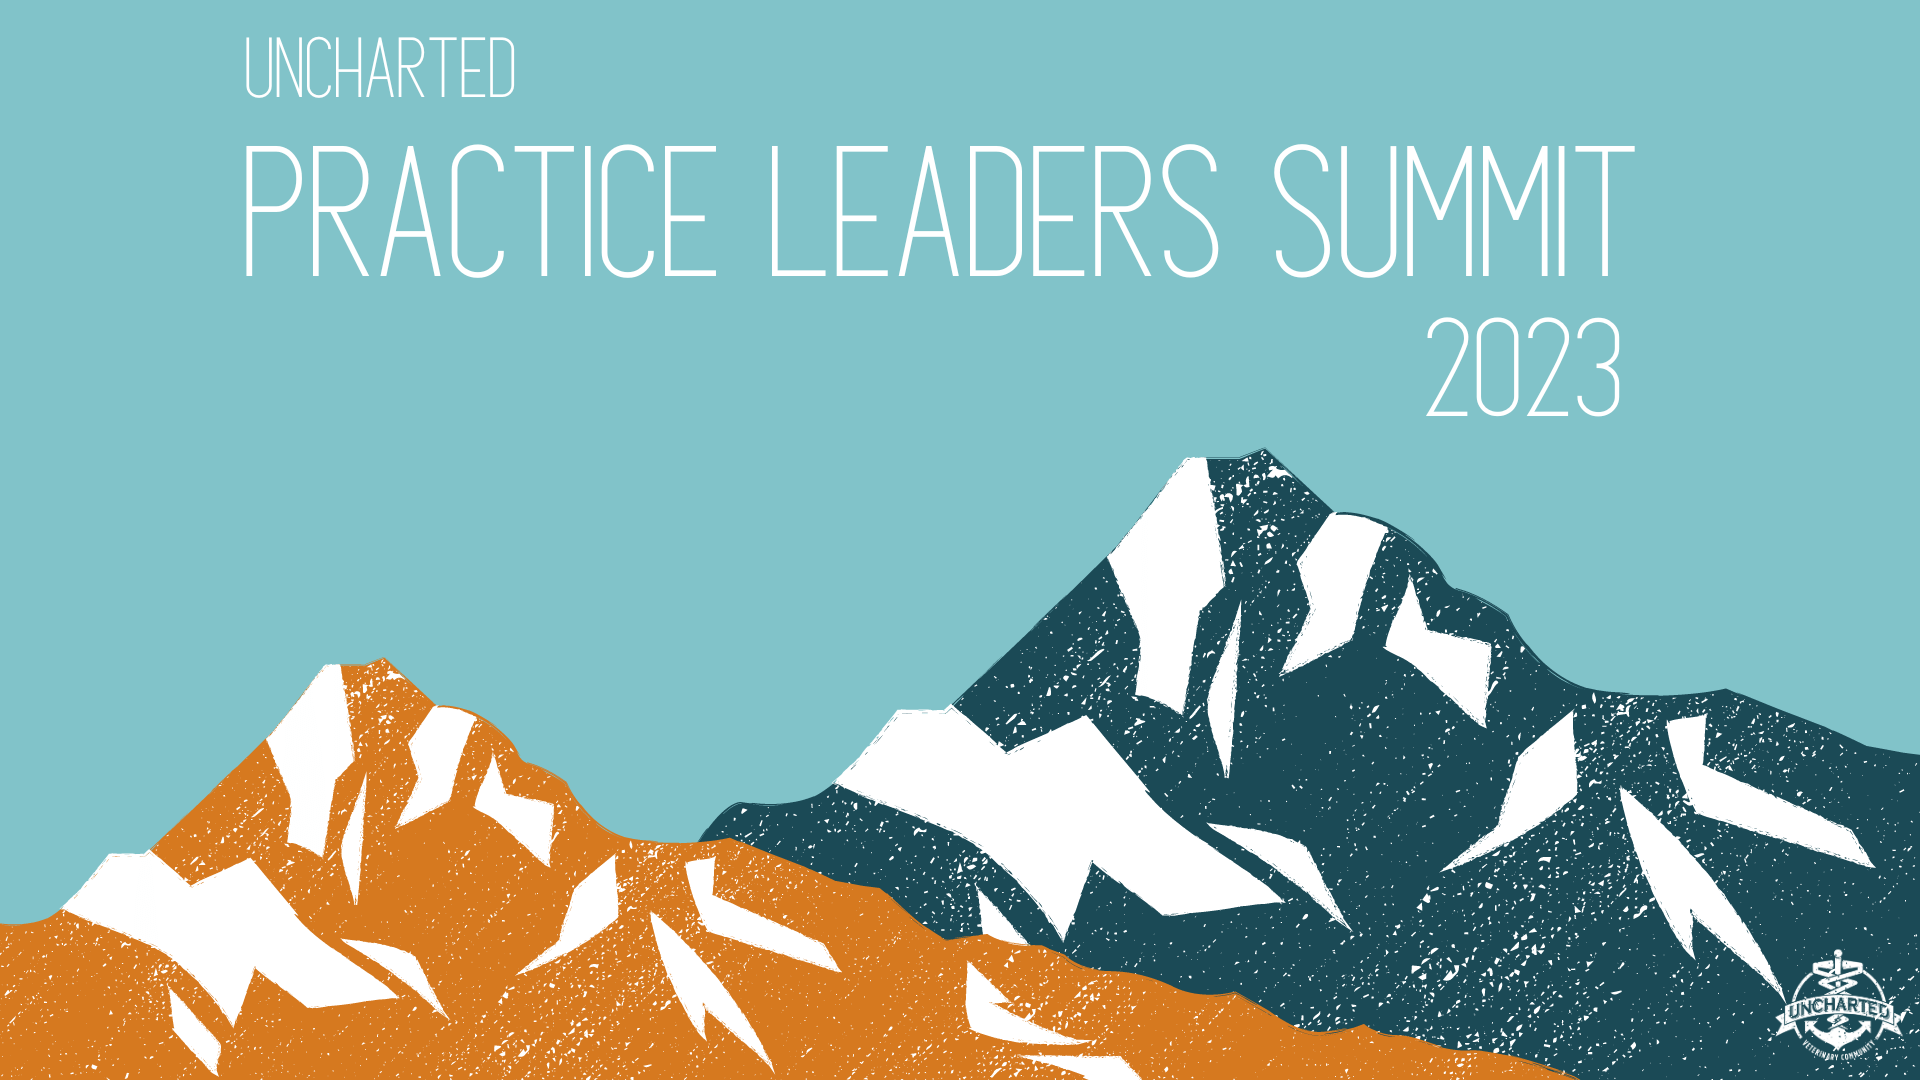 graphic of mountains with title Uncharted Practice Leaders Summit 2023